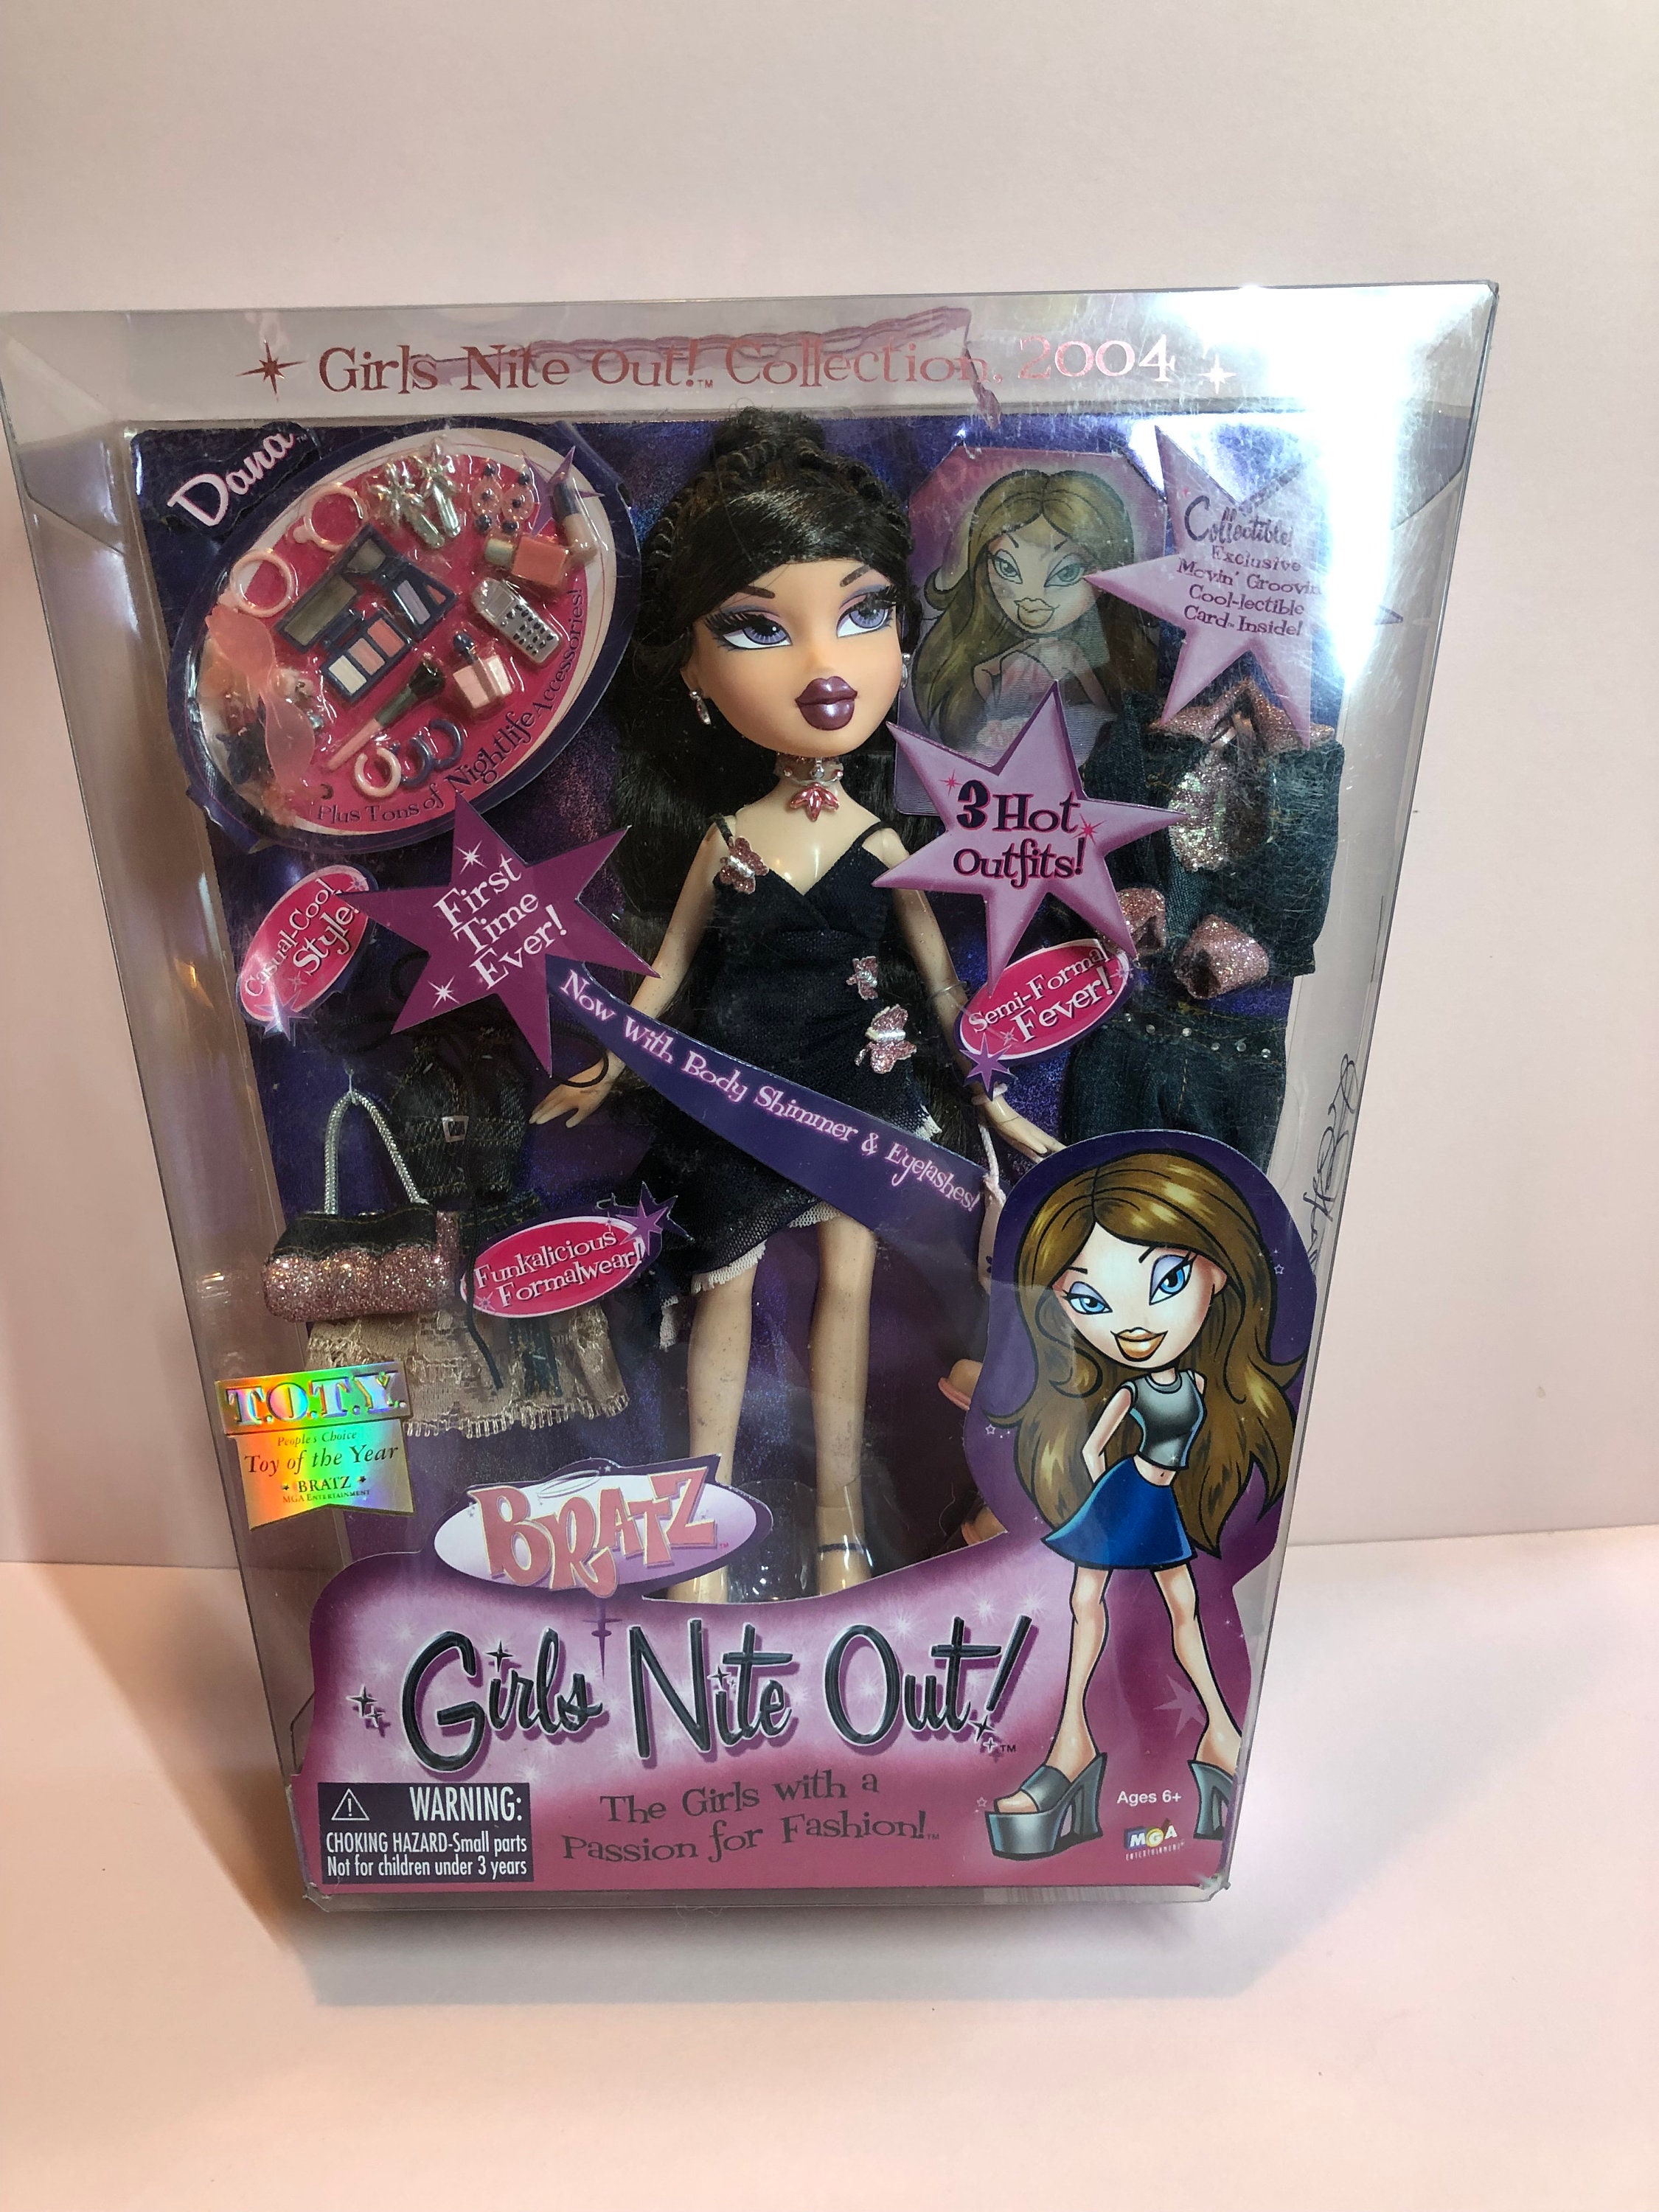 Bratz Girls Night Out Dana! Original Edition. Autographed by Bratz Creator  Carter Bryant, from his personal collection.